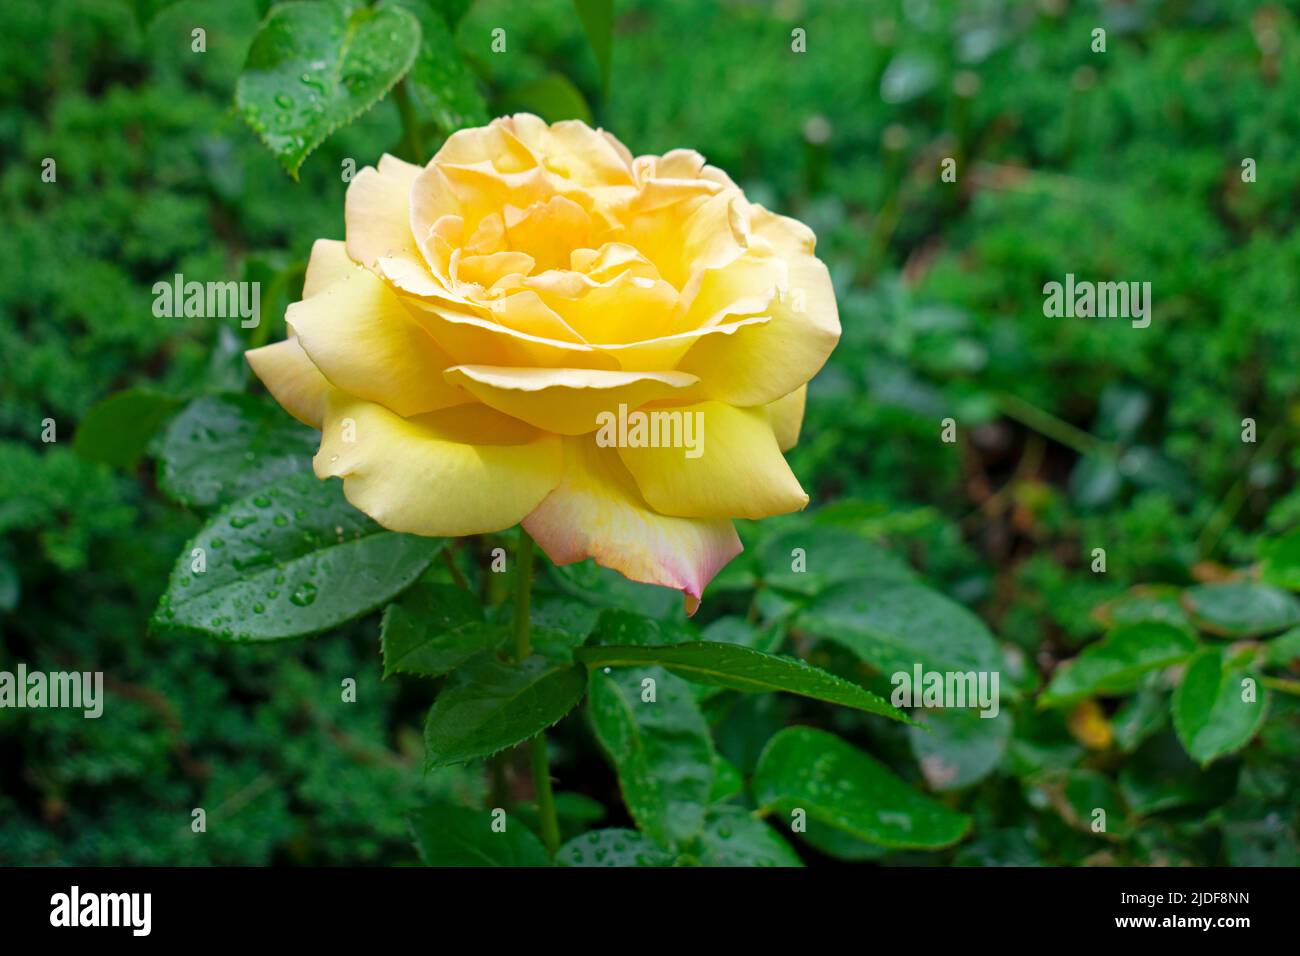 Single, large, pinkish yellow rose on a blurred green background of wet leaves and shrubs -19 Stock Photo